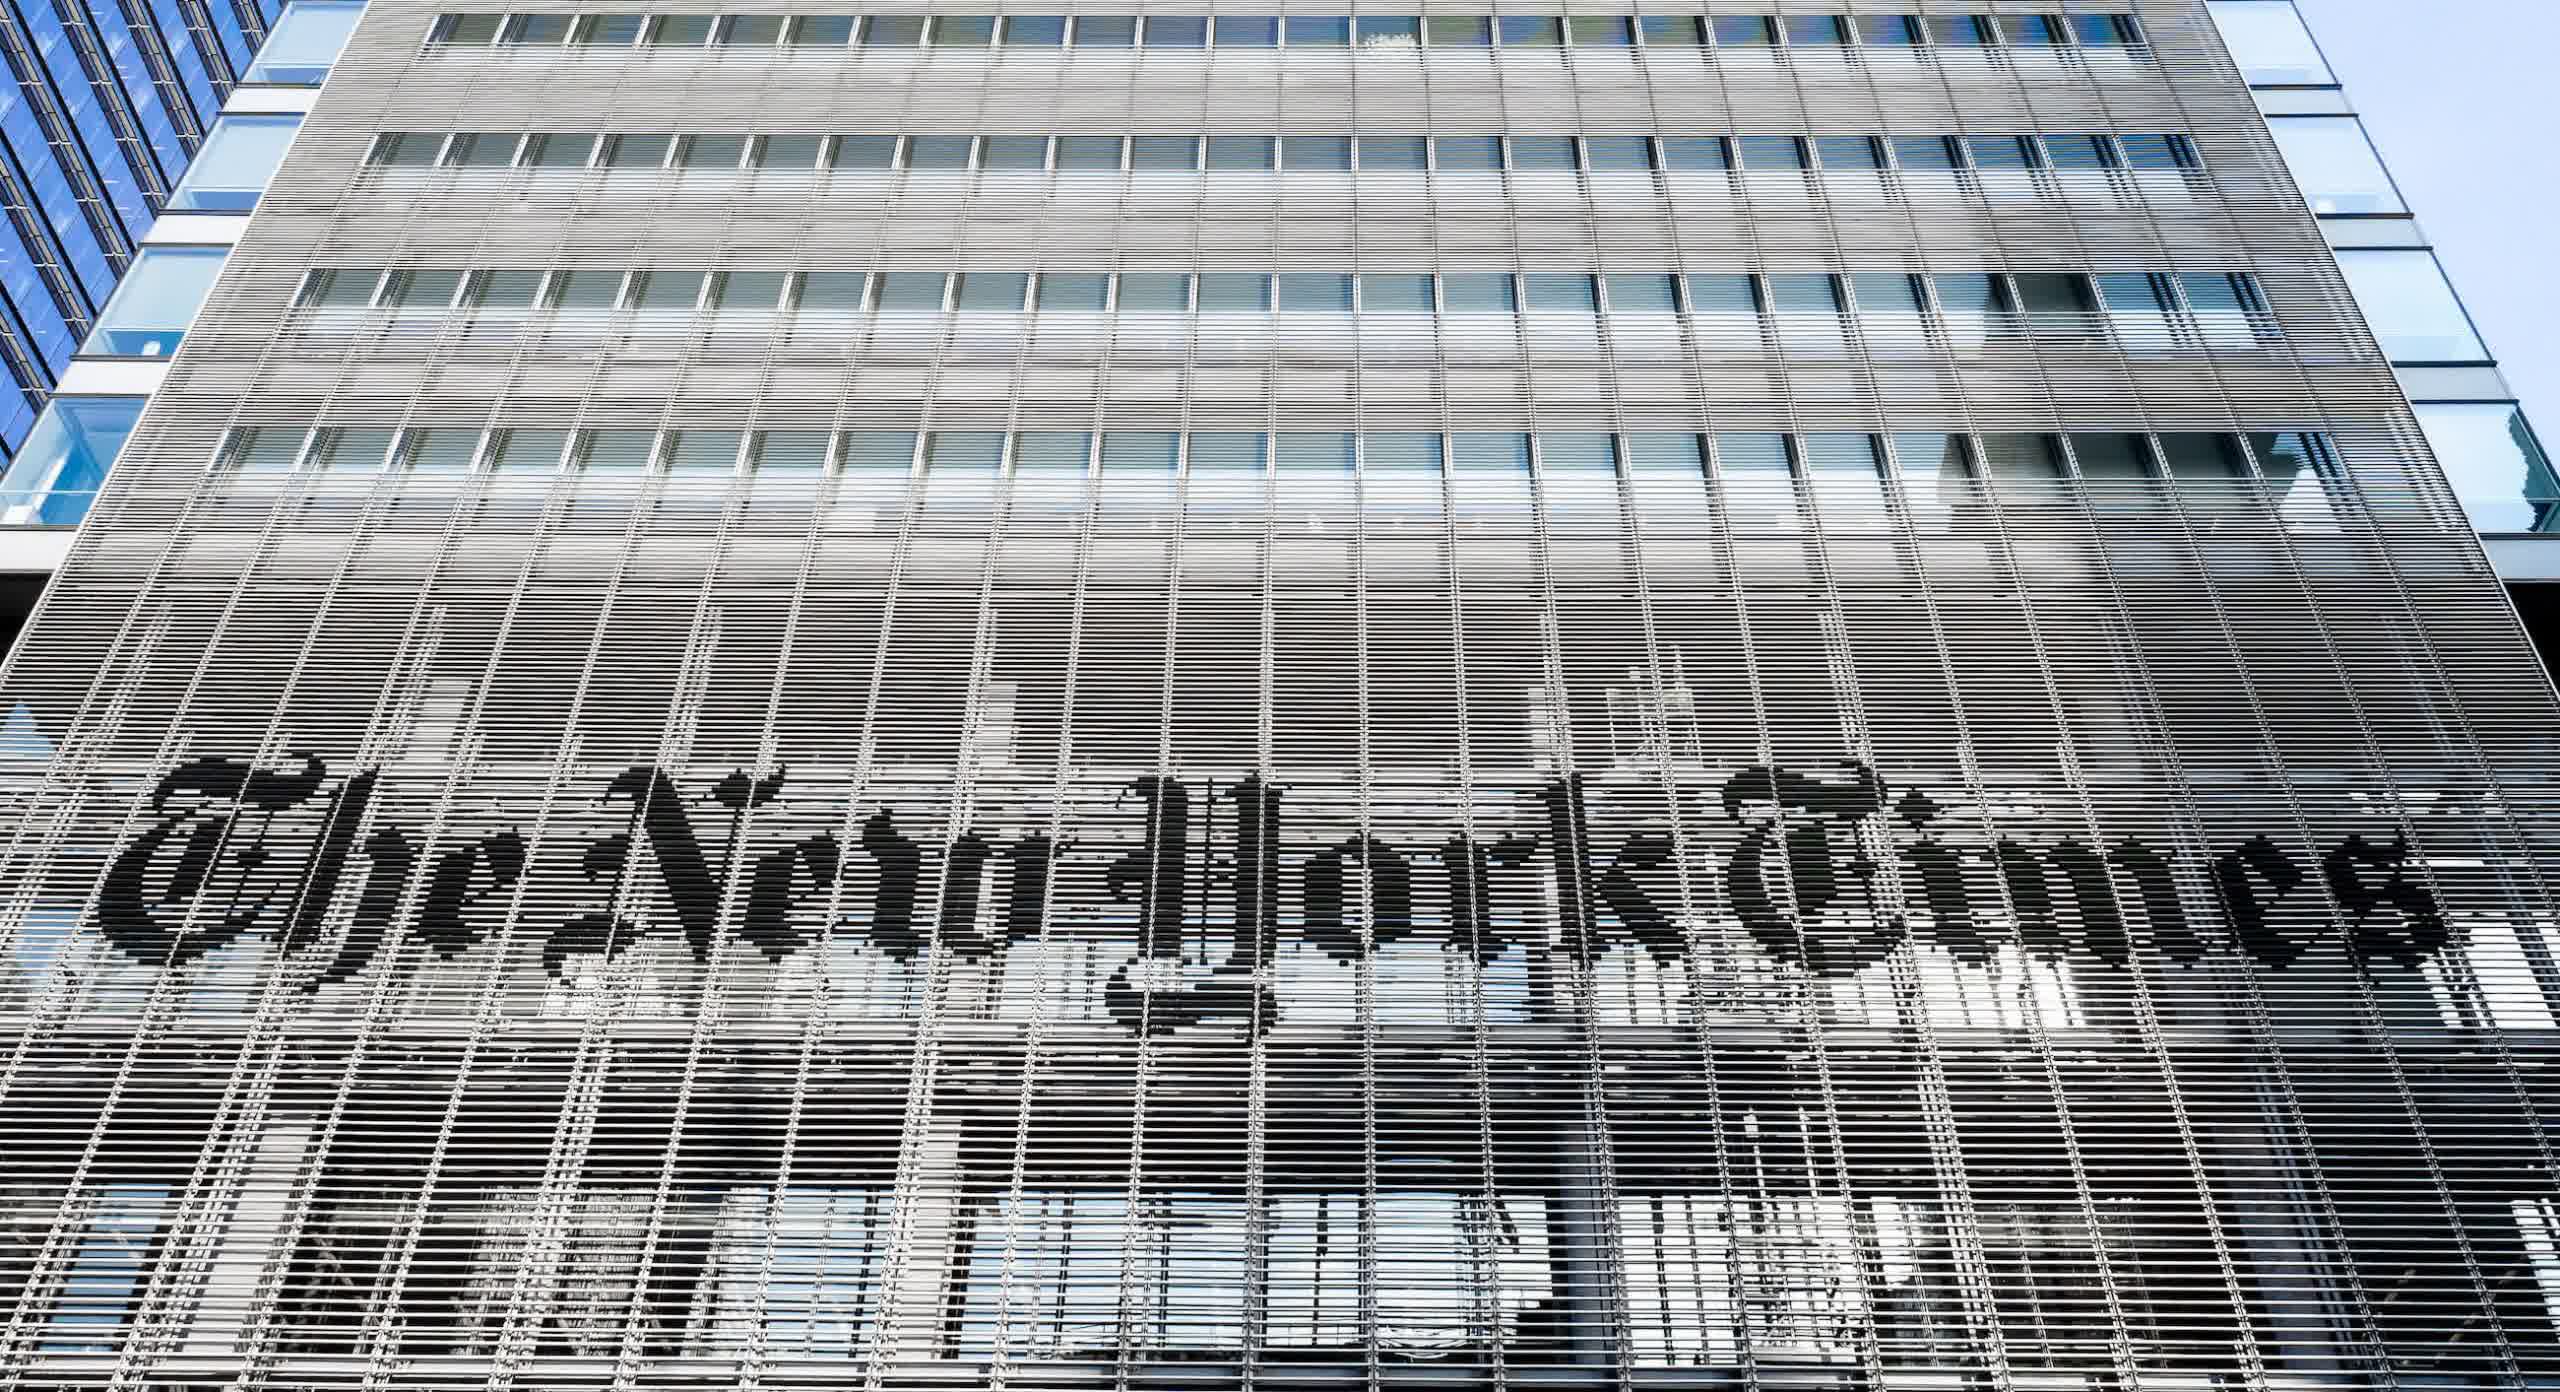 Wordle completes move to The New York Times, though some players lost streaks